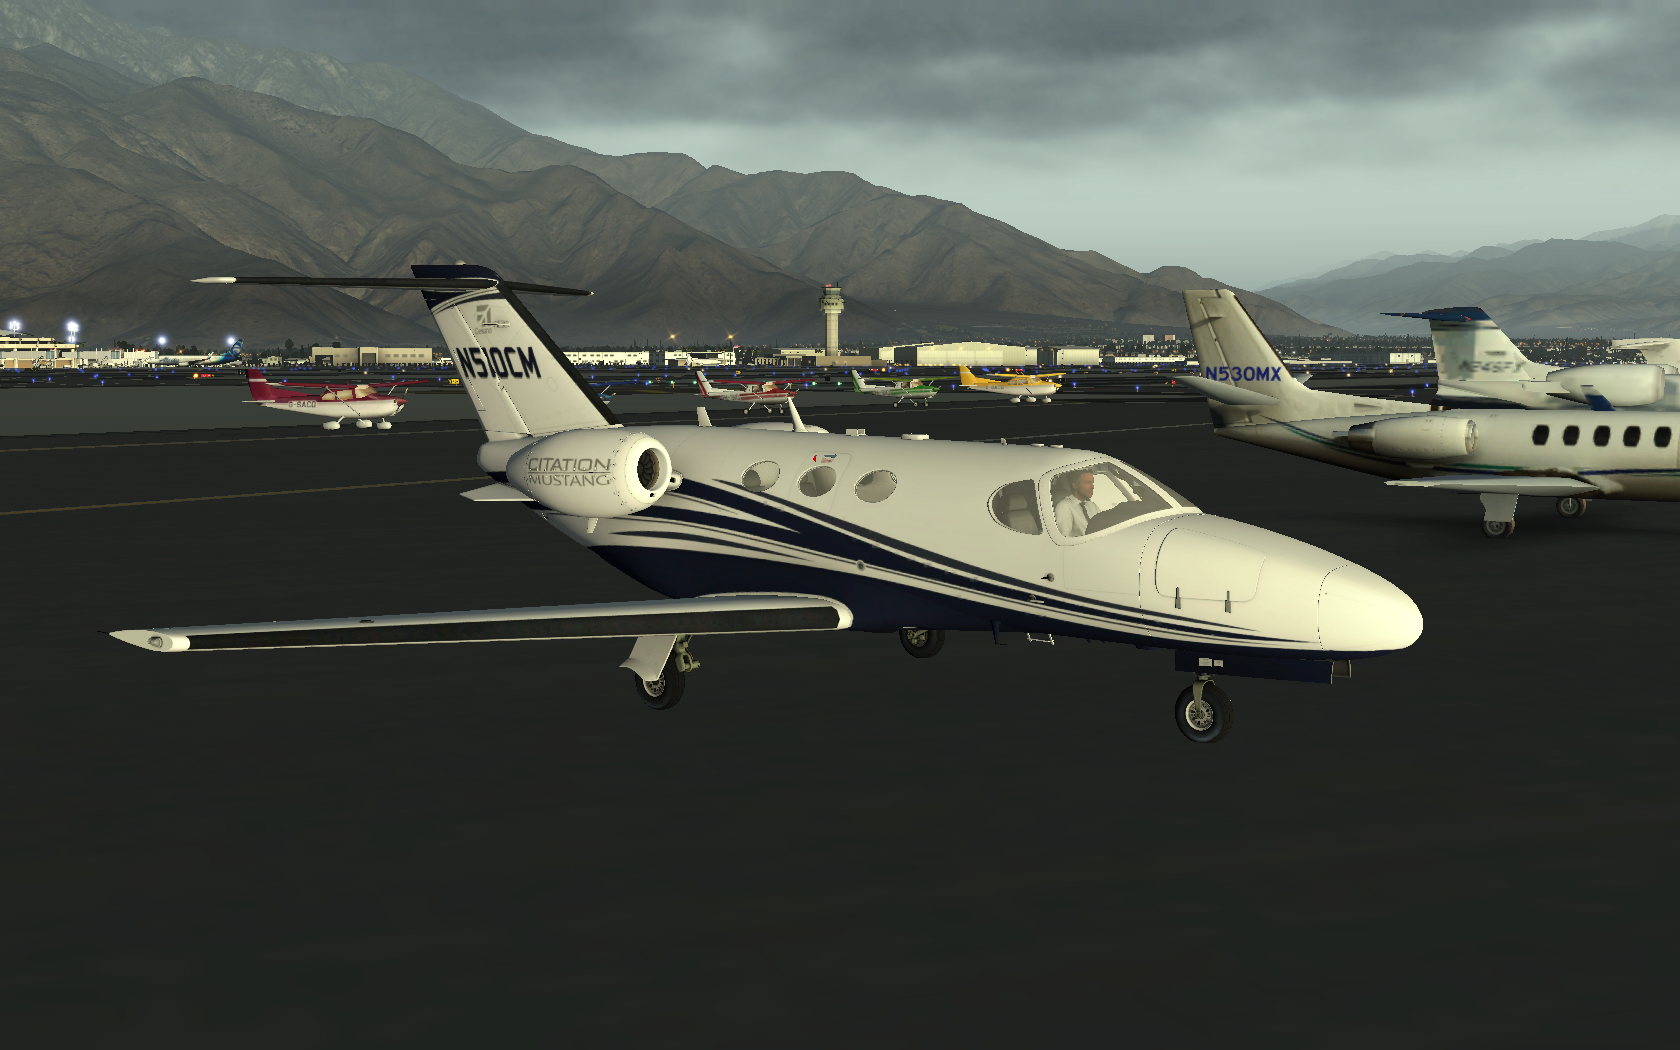 First flight in the Mustang,  Arriving Palm Springs.